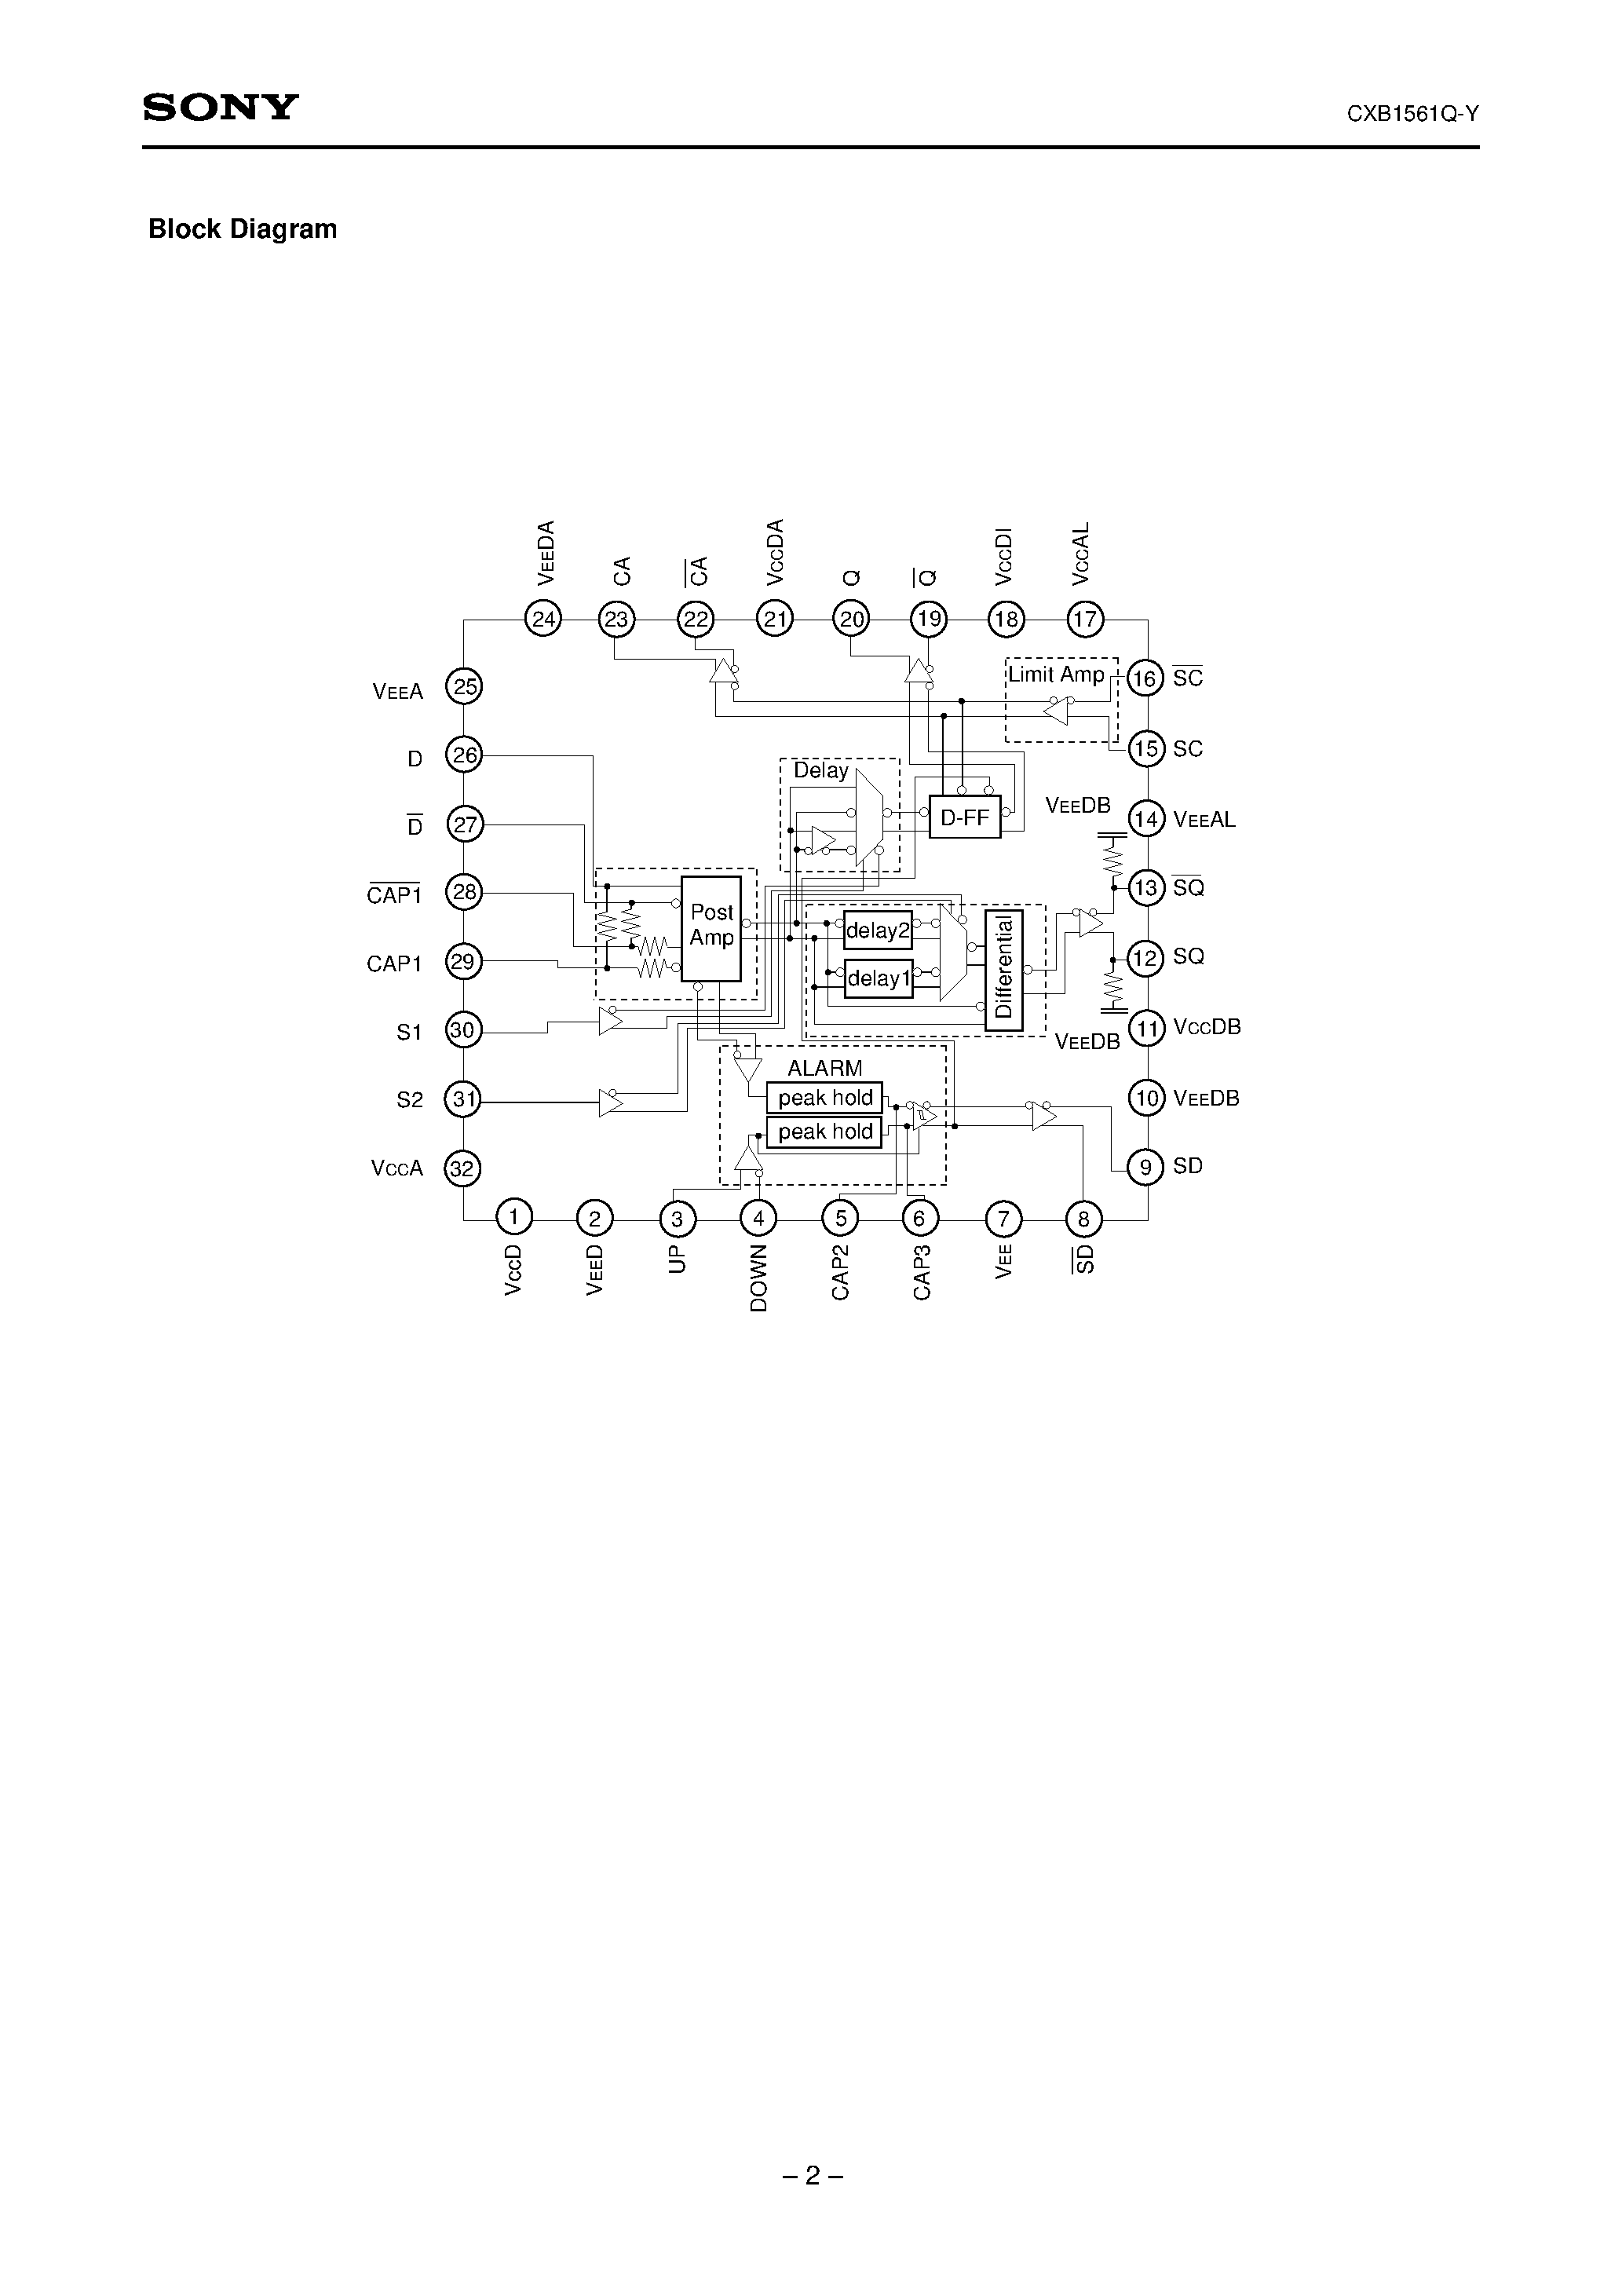 Datasheet CXB1561Q-Y - s3R-IC for Optical Fiber Cimmunication Receiver page 2